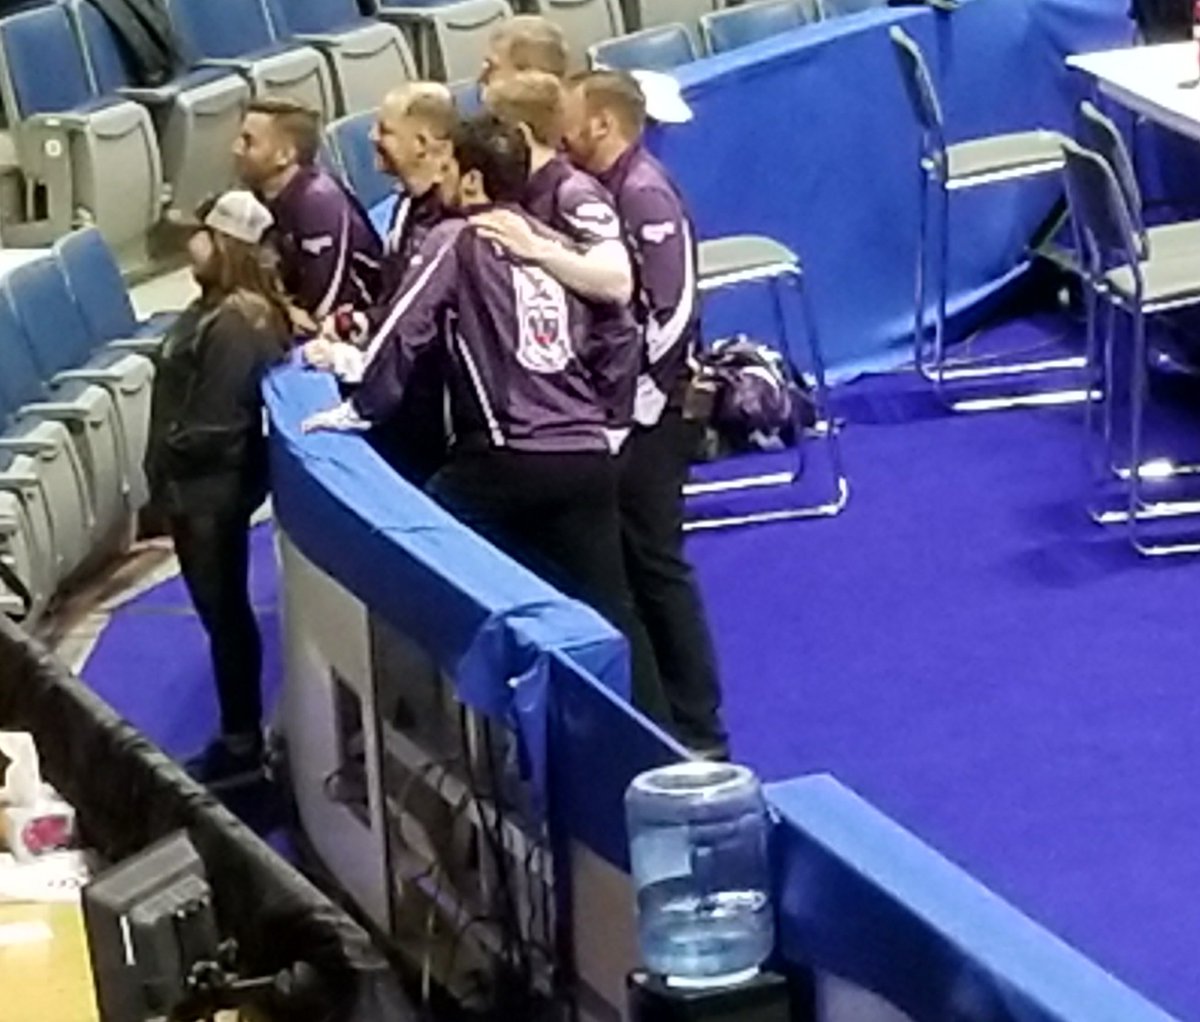 Excellent to see Team Yukon enjoying some time with fans after the W in their final game this morning #TeamPurple 💜 #Brier2018